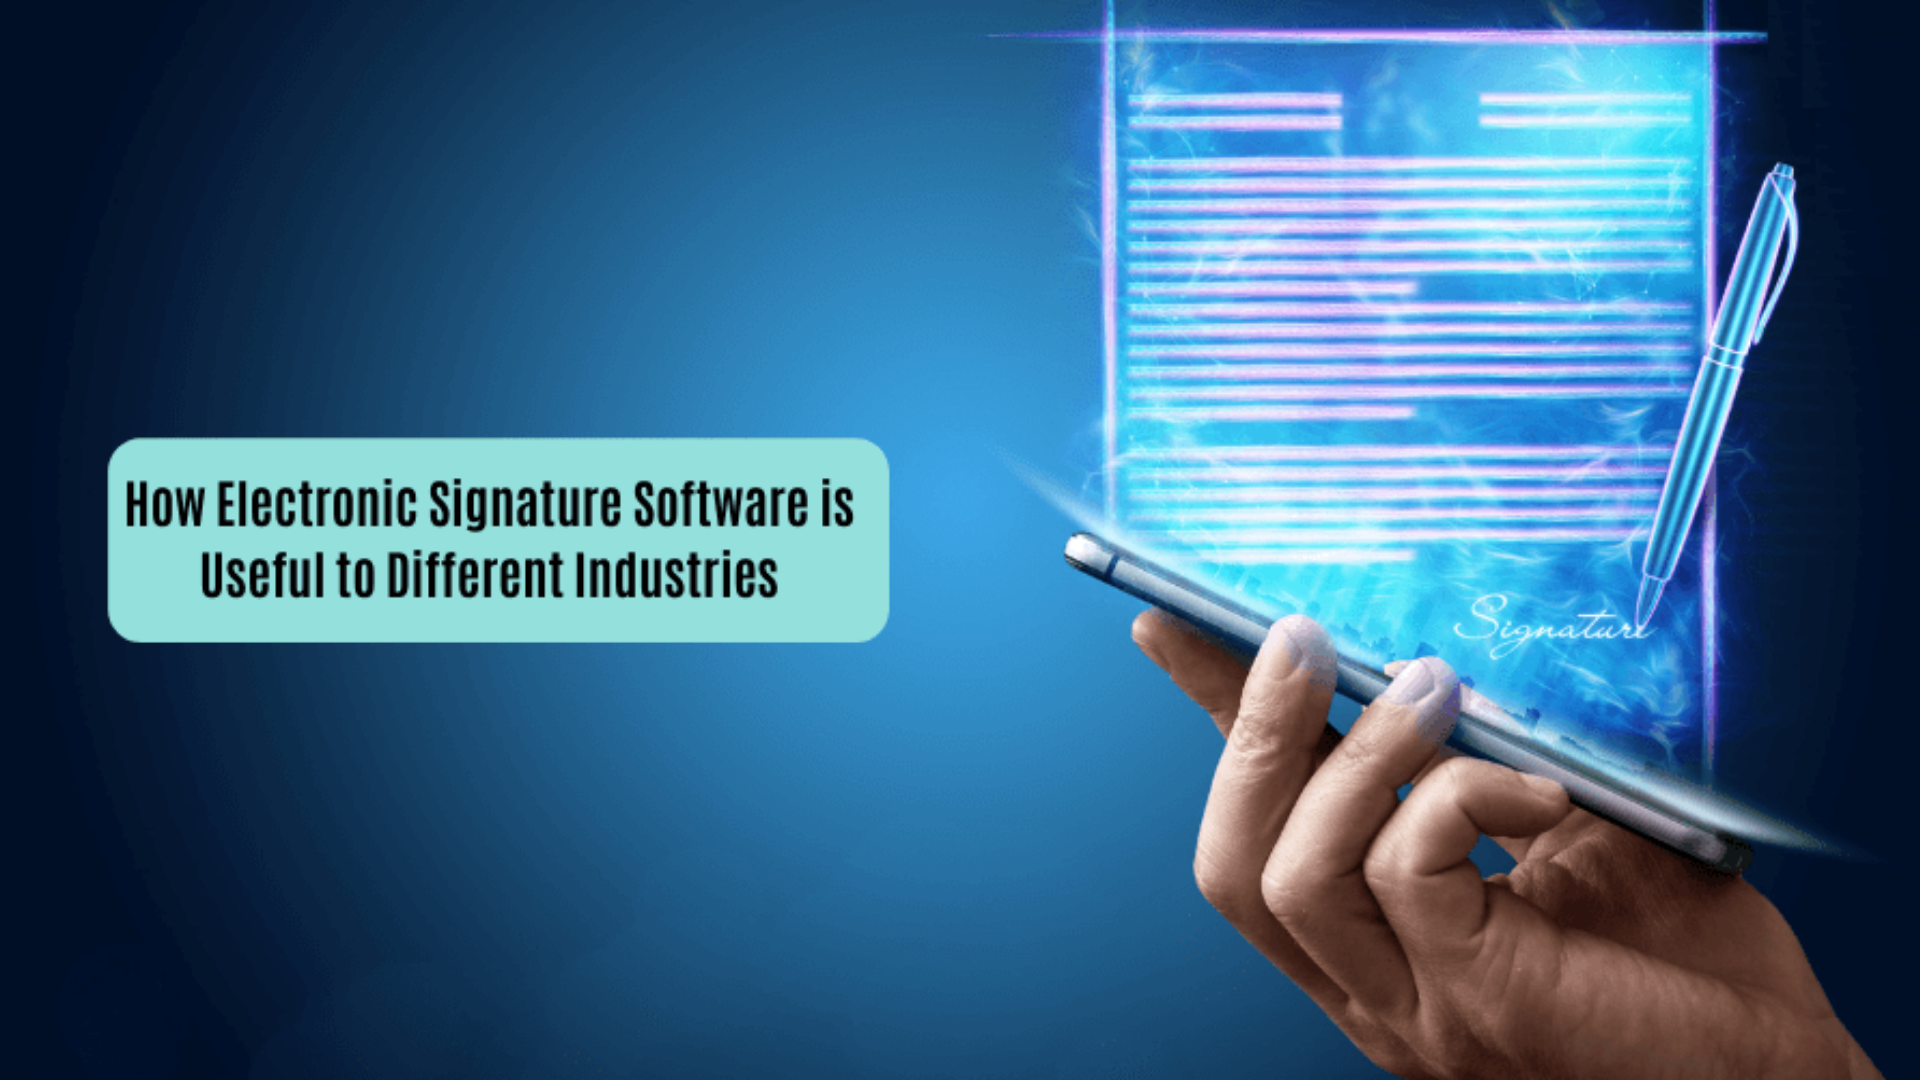 How Electronic Signature Software is Useful to Different Industries